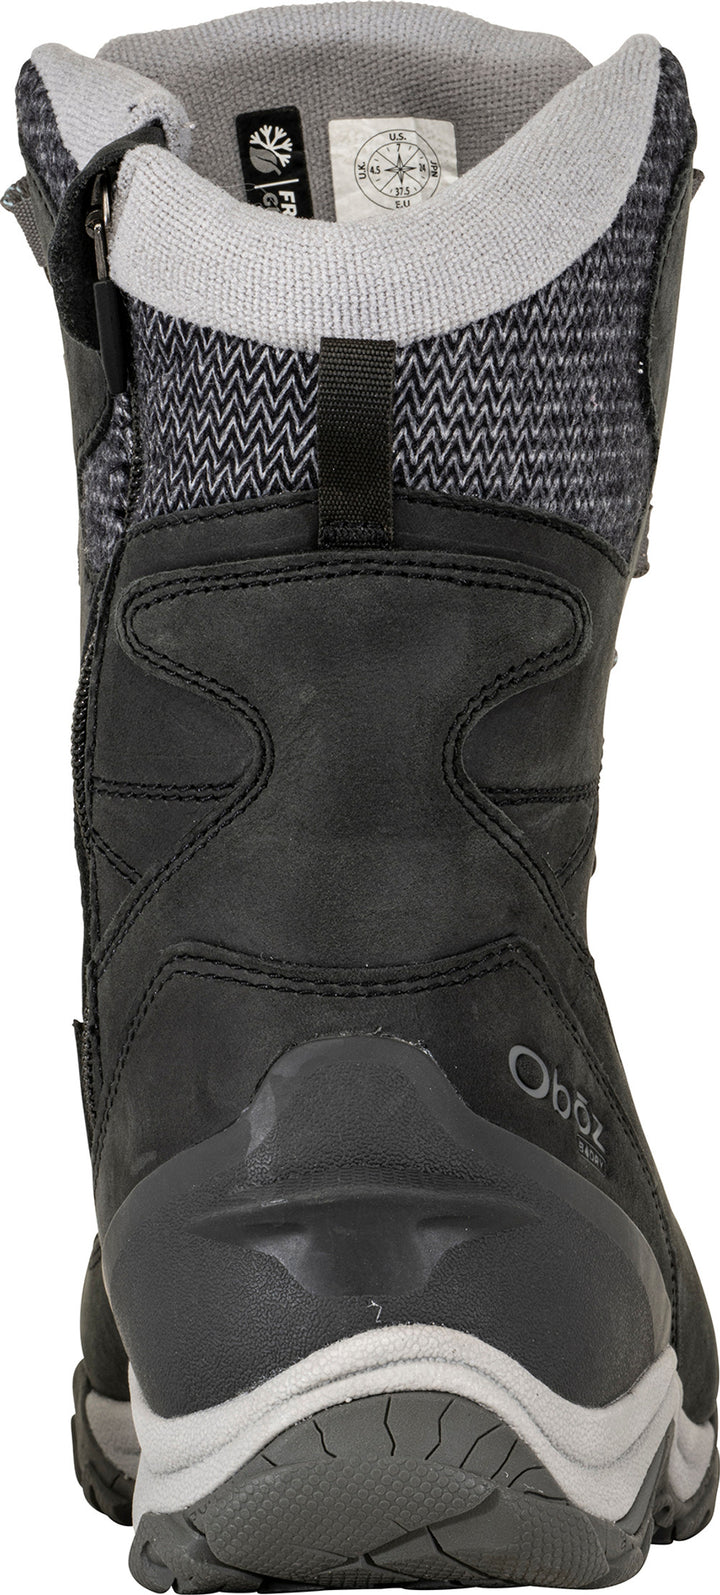 Women's Oboz Ousel Mid Insulated Waterproof Color: Black Sea 5